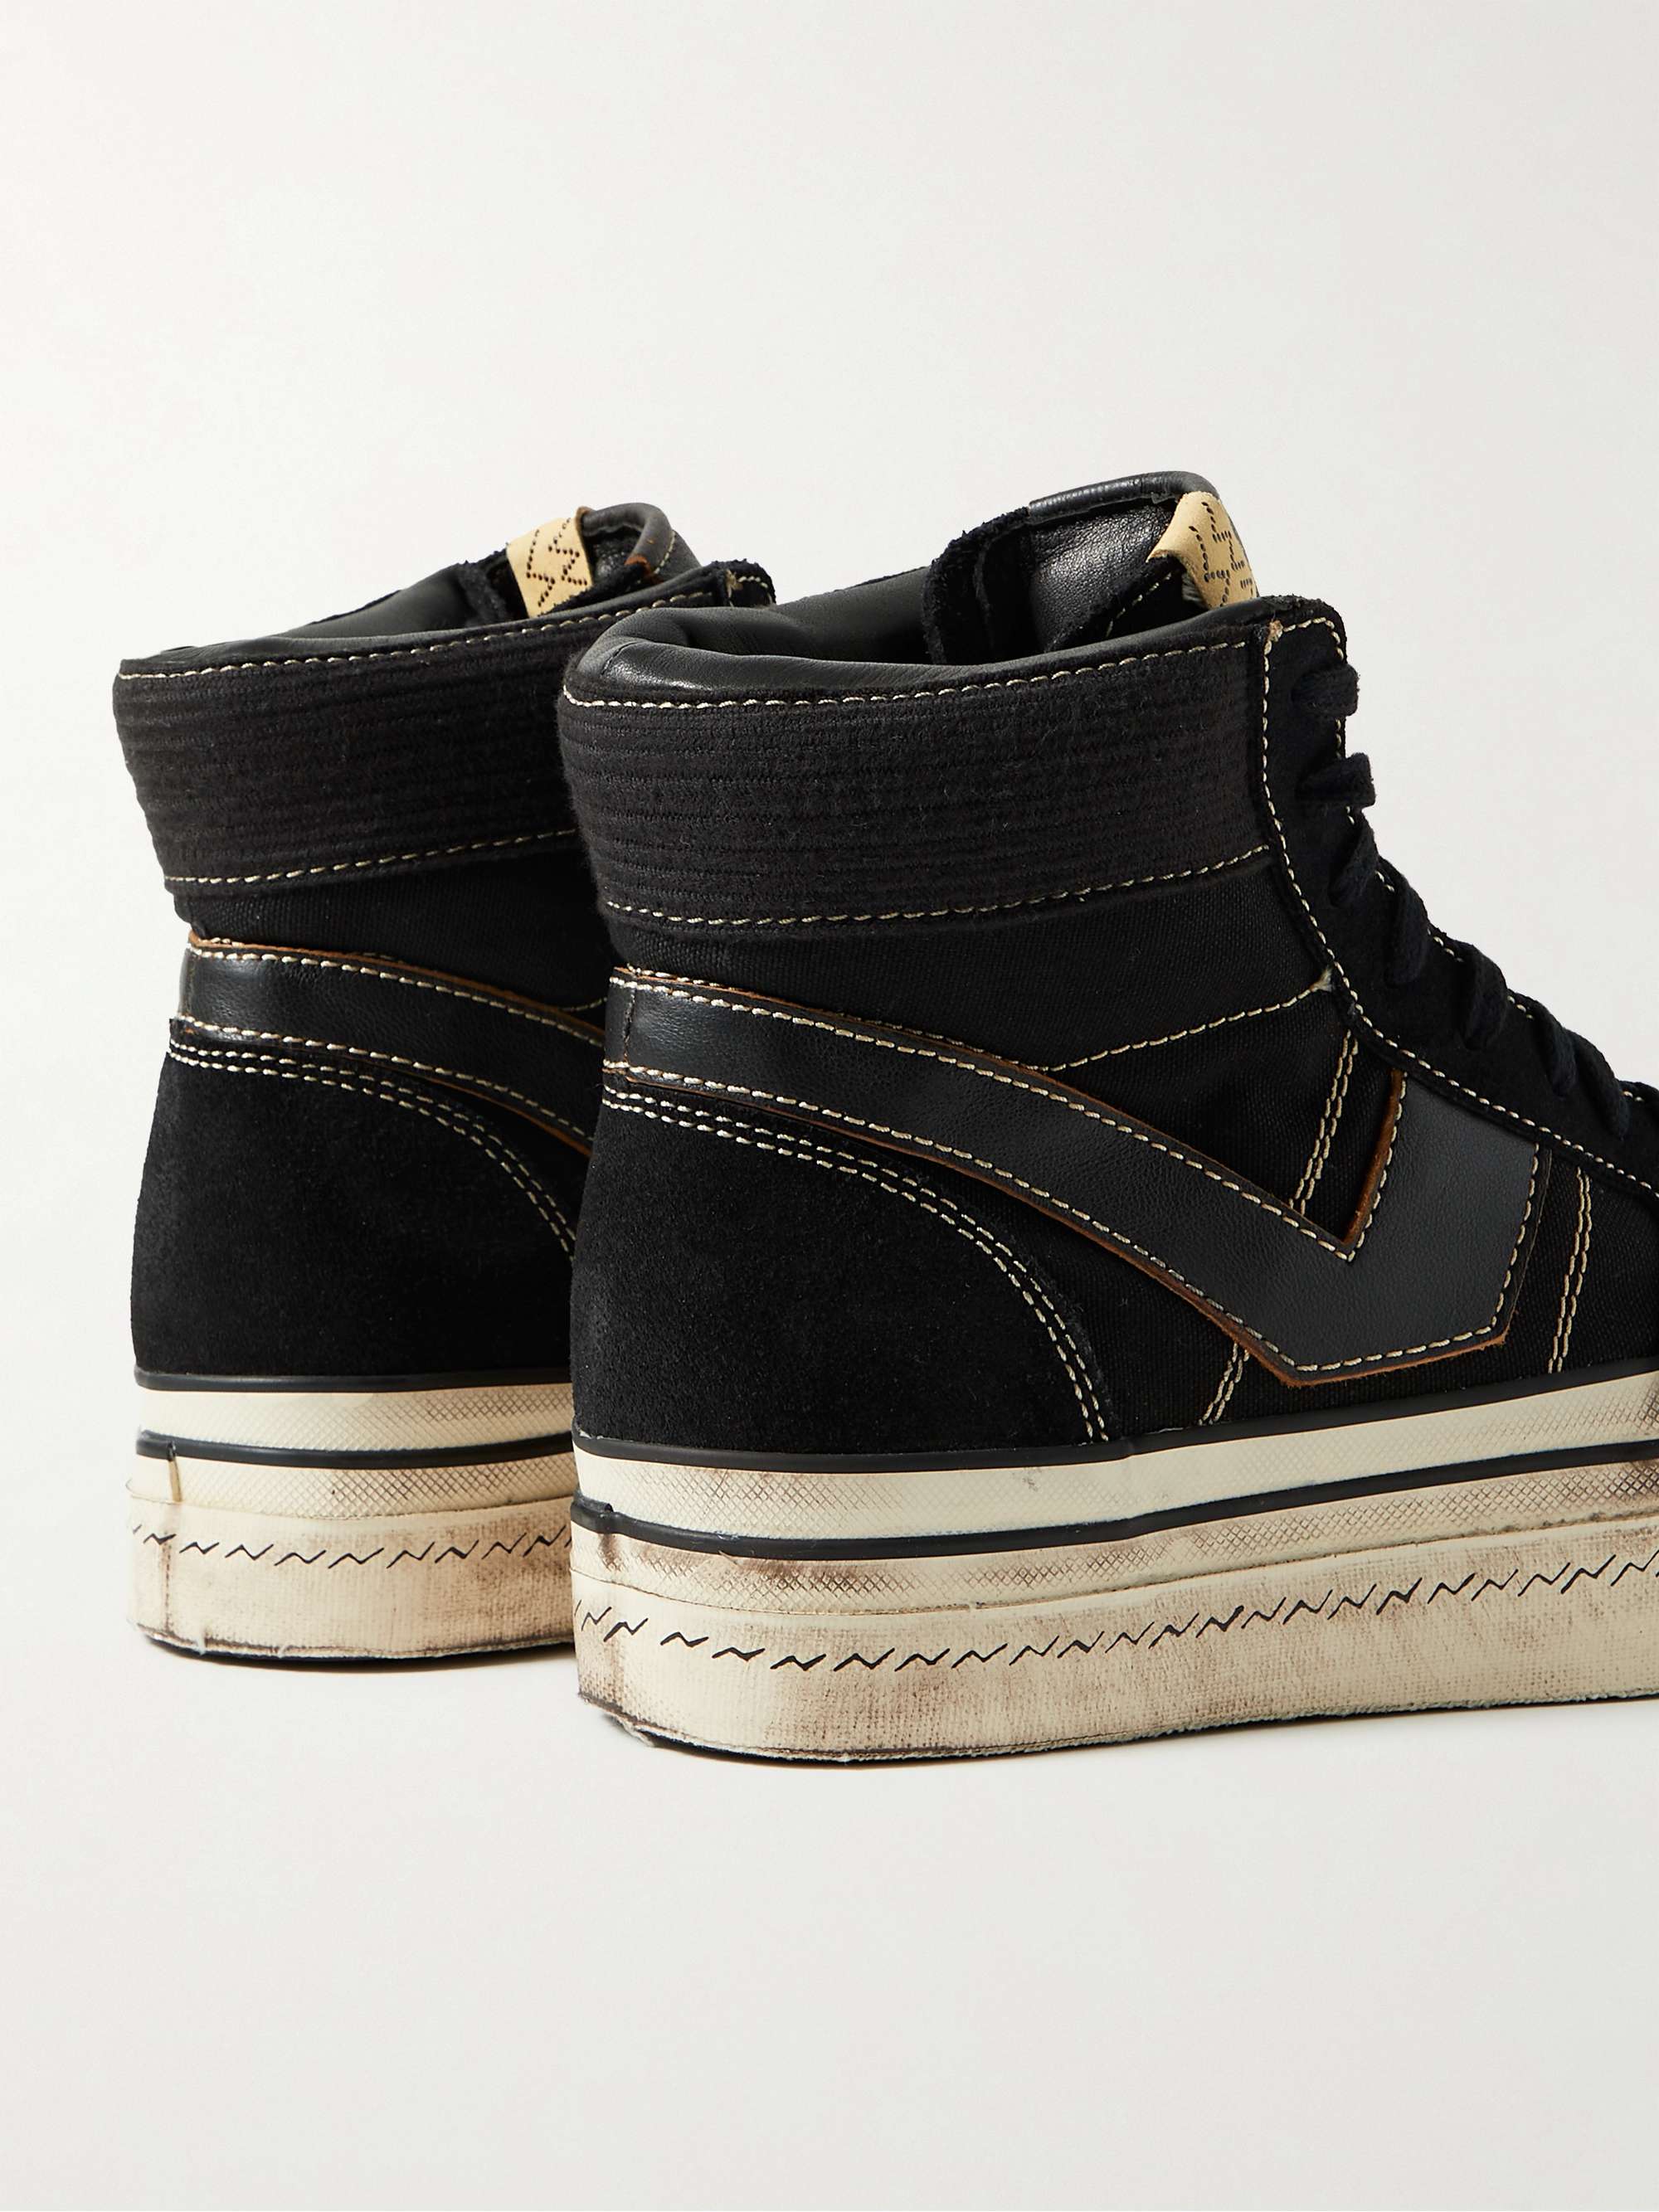 VISVIM Zephyr Hi Distressed Leather-Trimmed Cotton-Canvas High-Top Sneakers